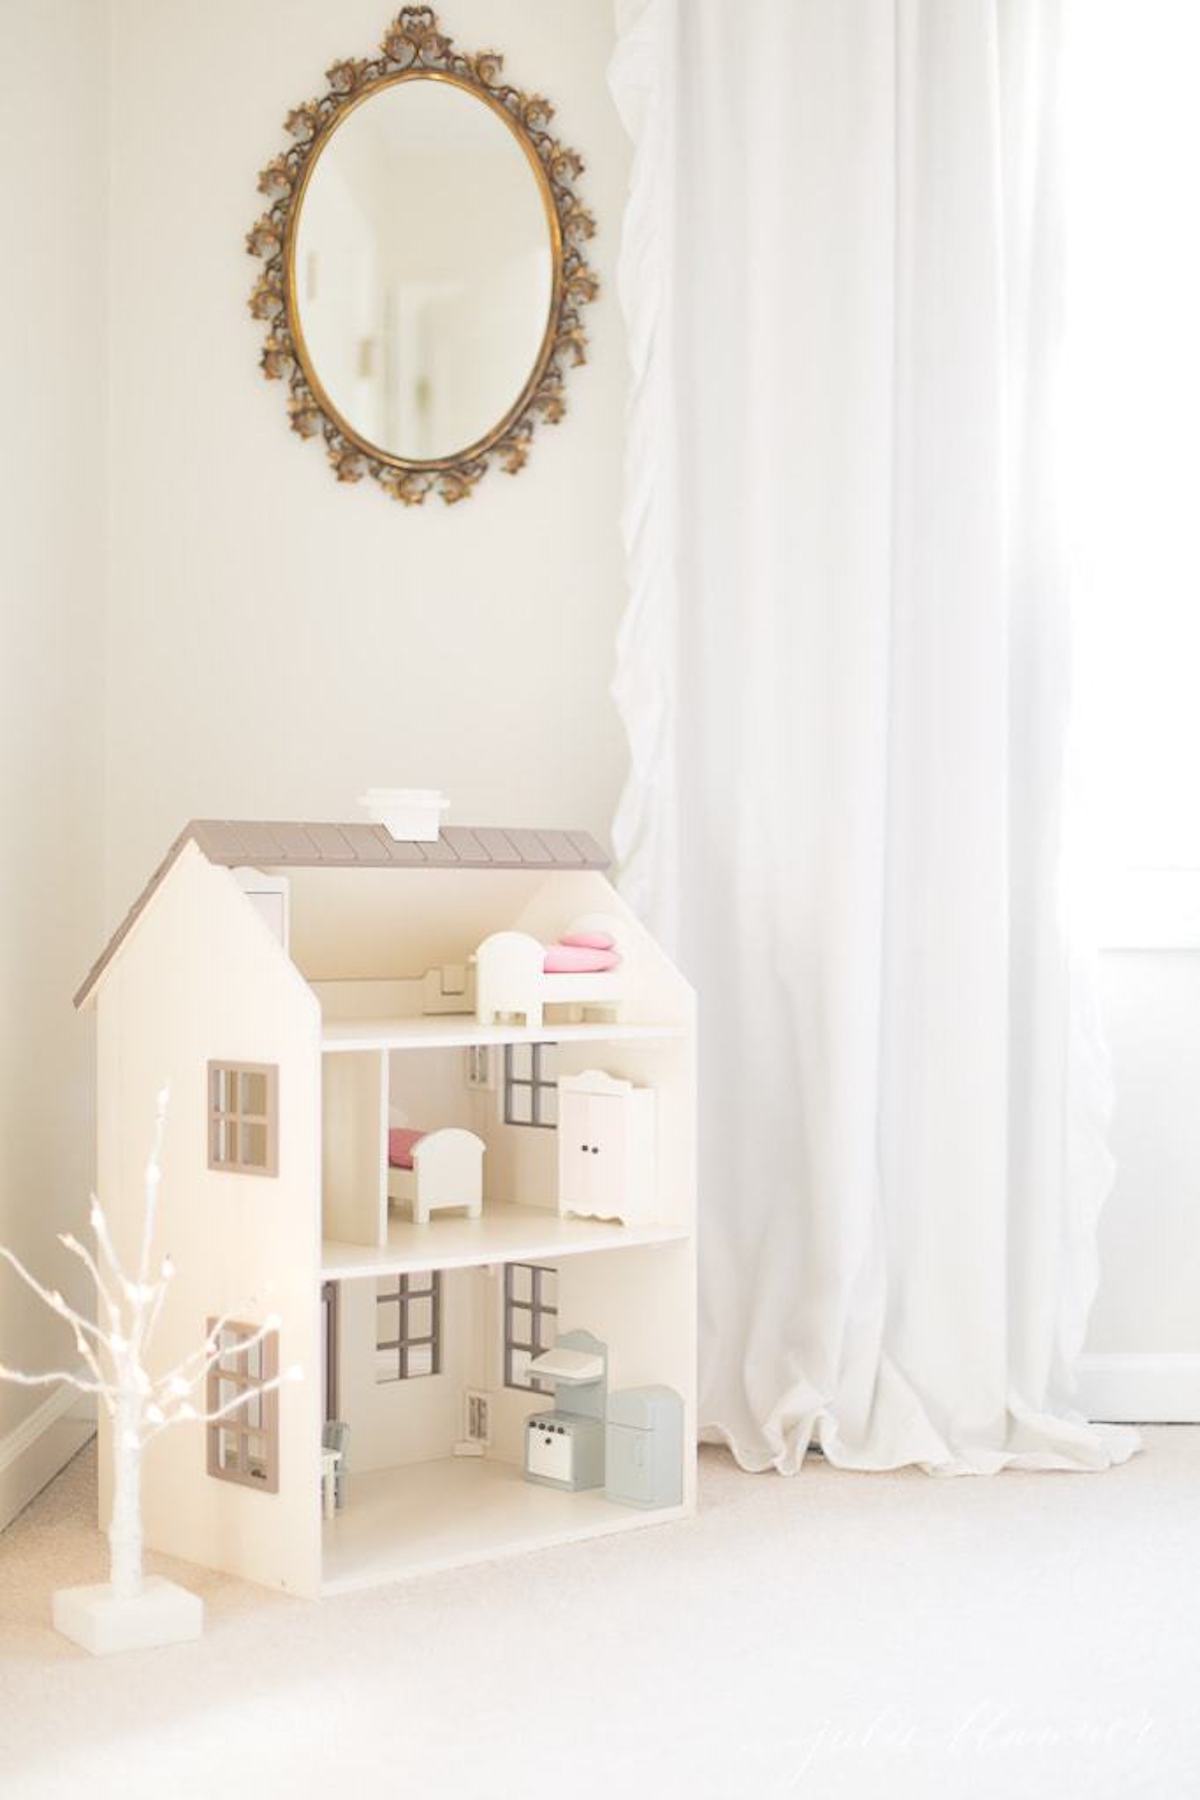 A doll house in a white room with a fairy light tree.